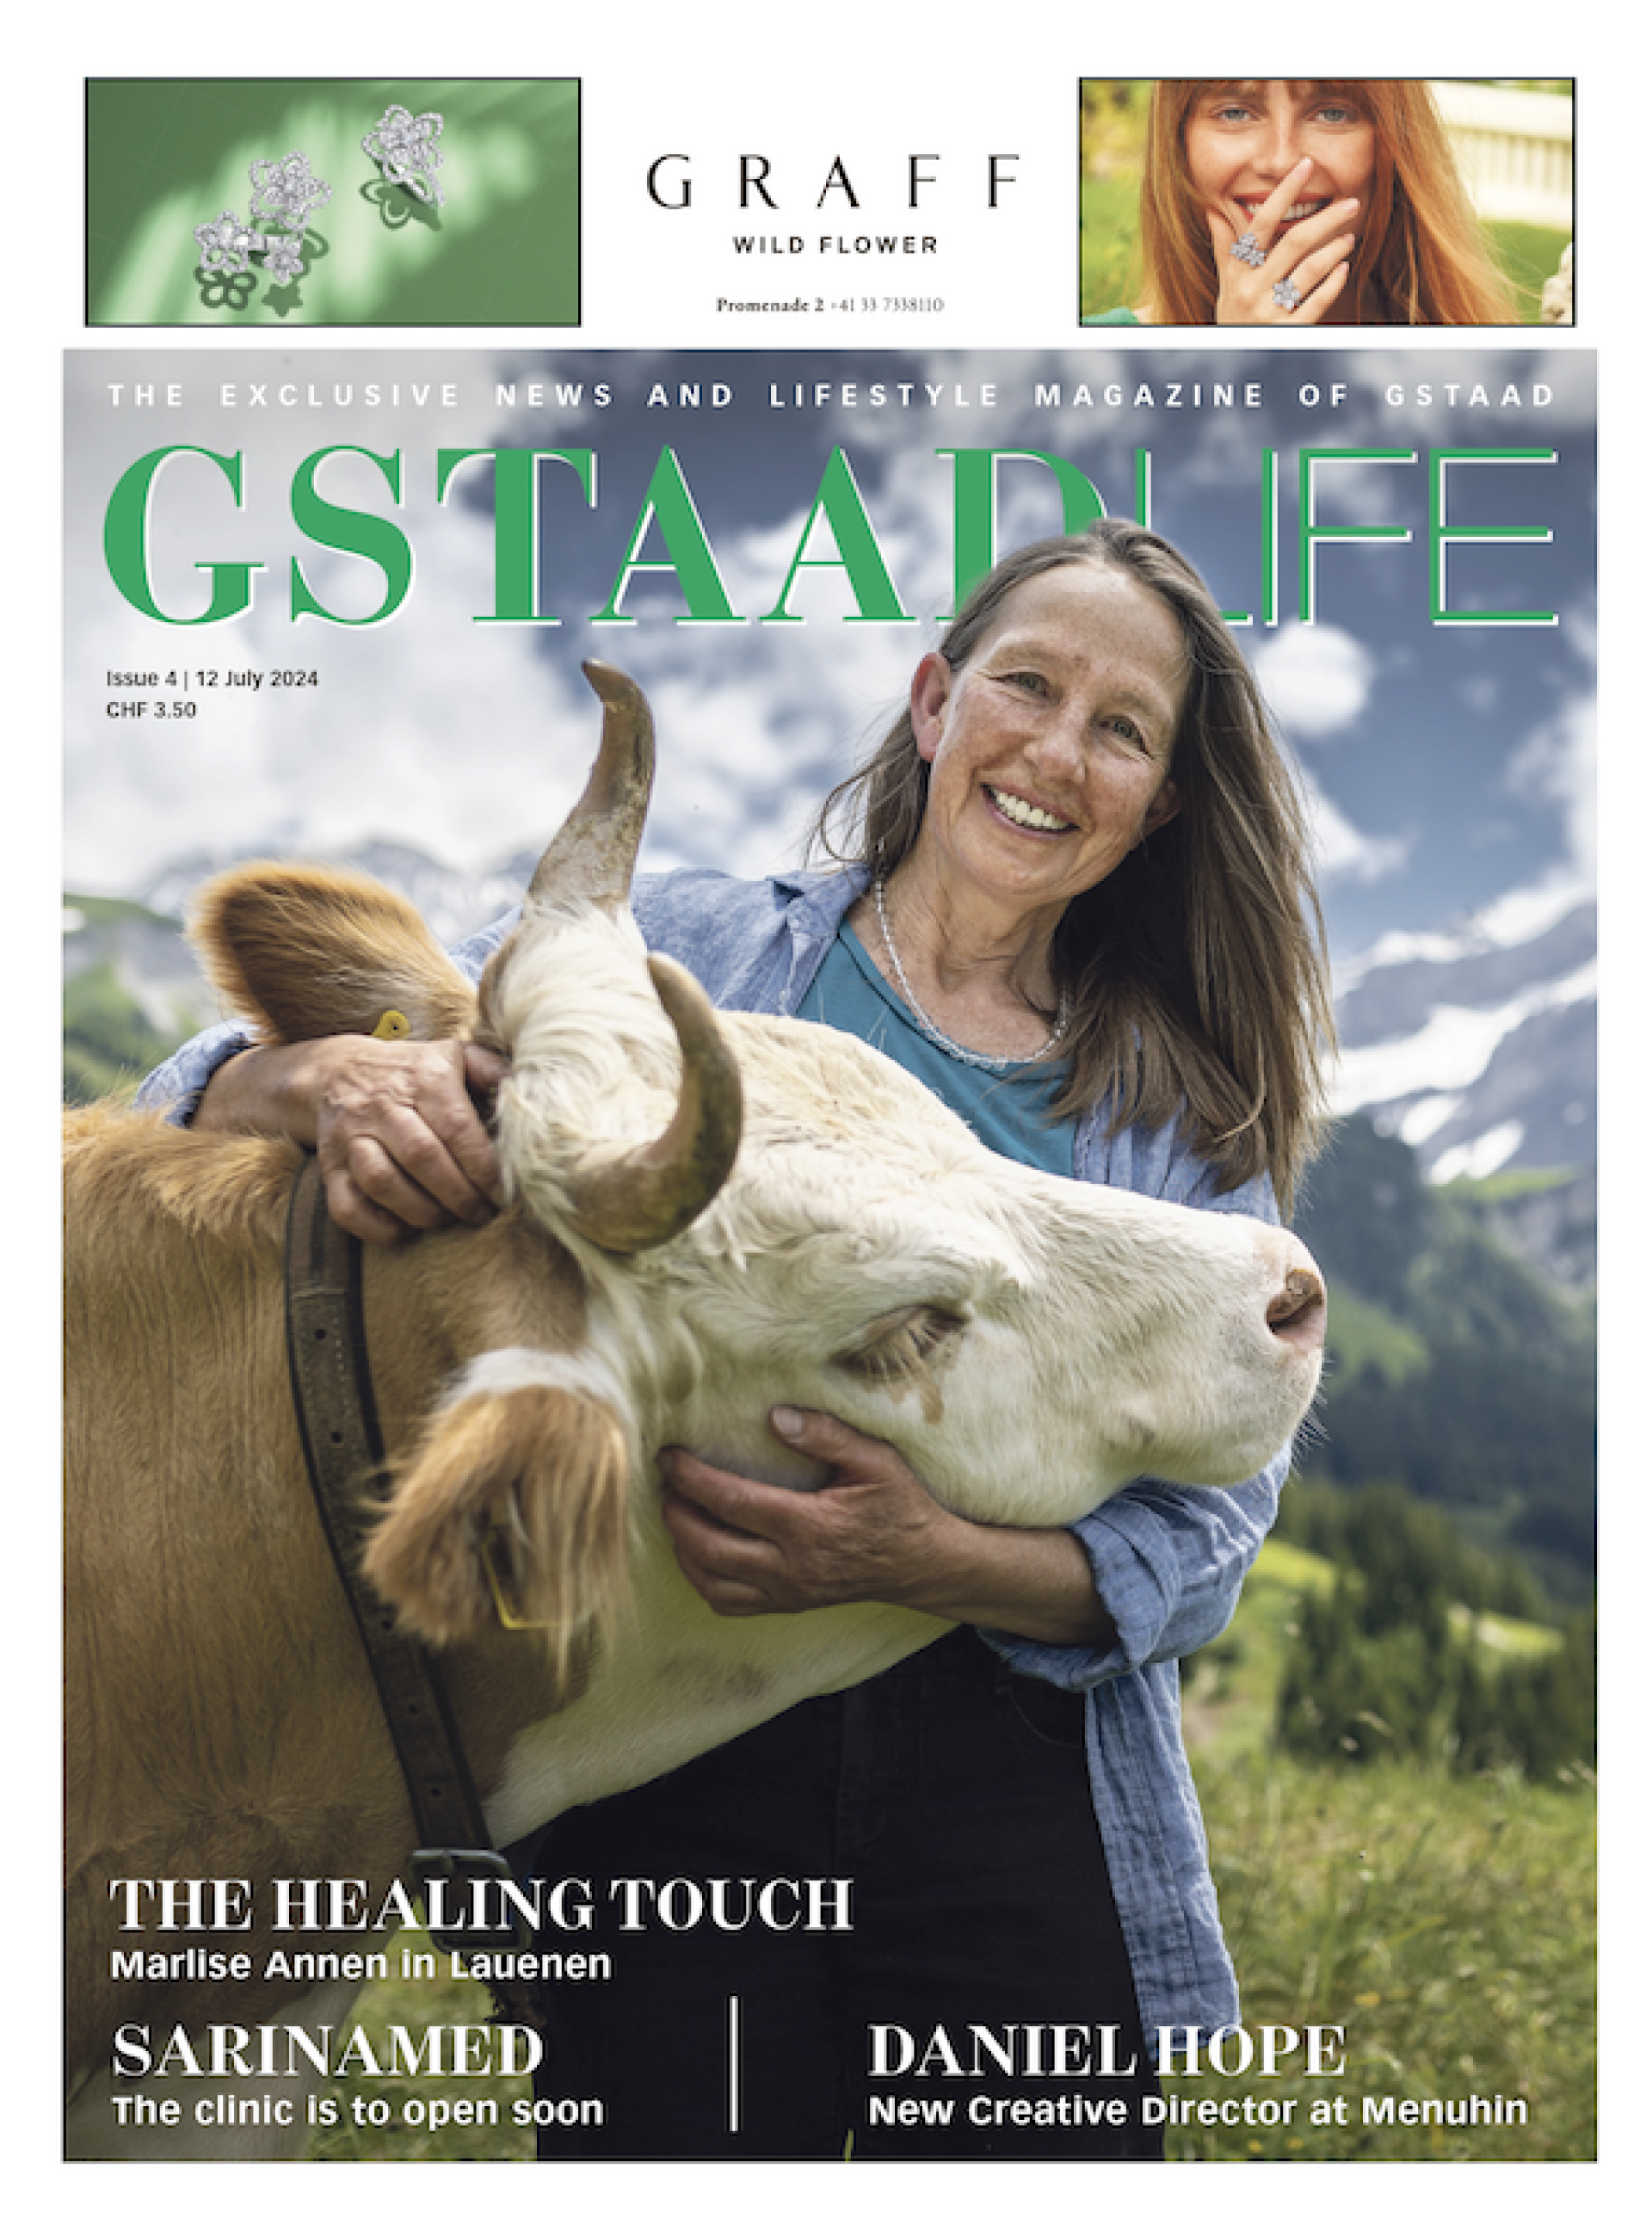 Marlise Annen from Lauren in conversation with GstaadLife about her relationship with nature | Photo: Sven Pieren